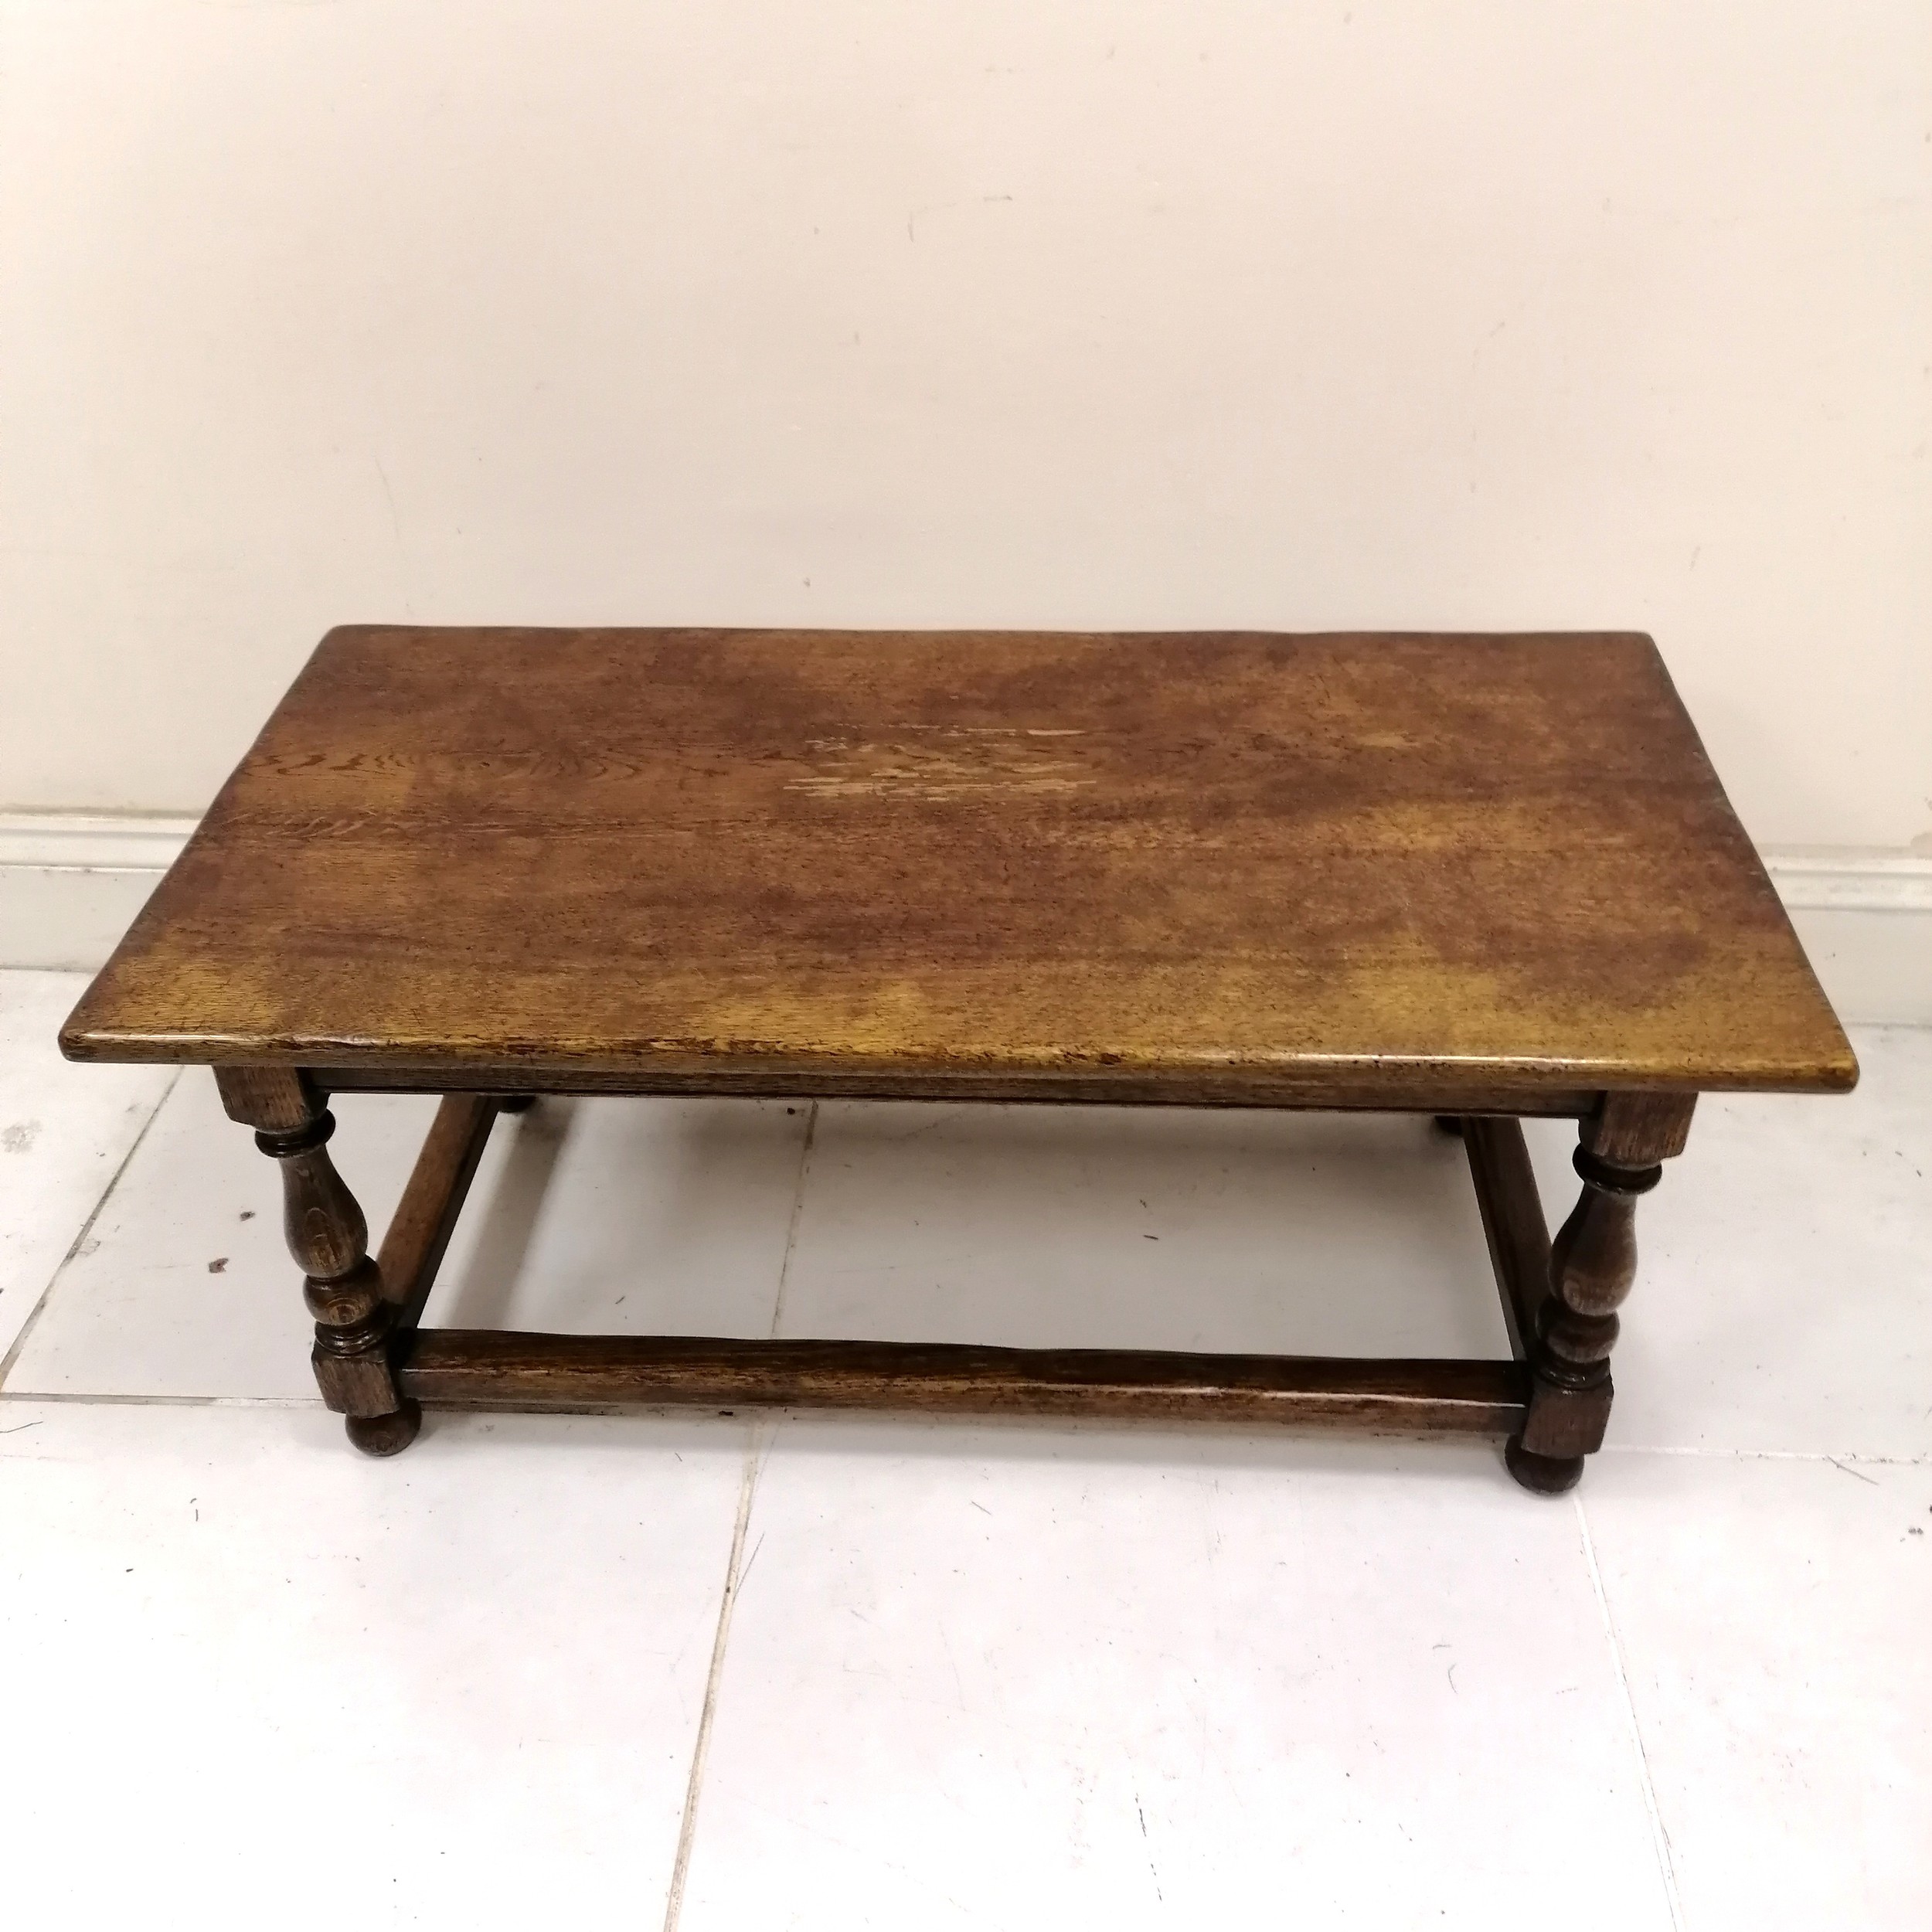 Oak refectory style coffee table with stretchered and turned base, in good used condition, 107 cm - Image 2 of 3